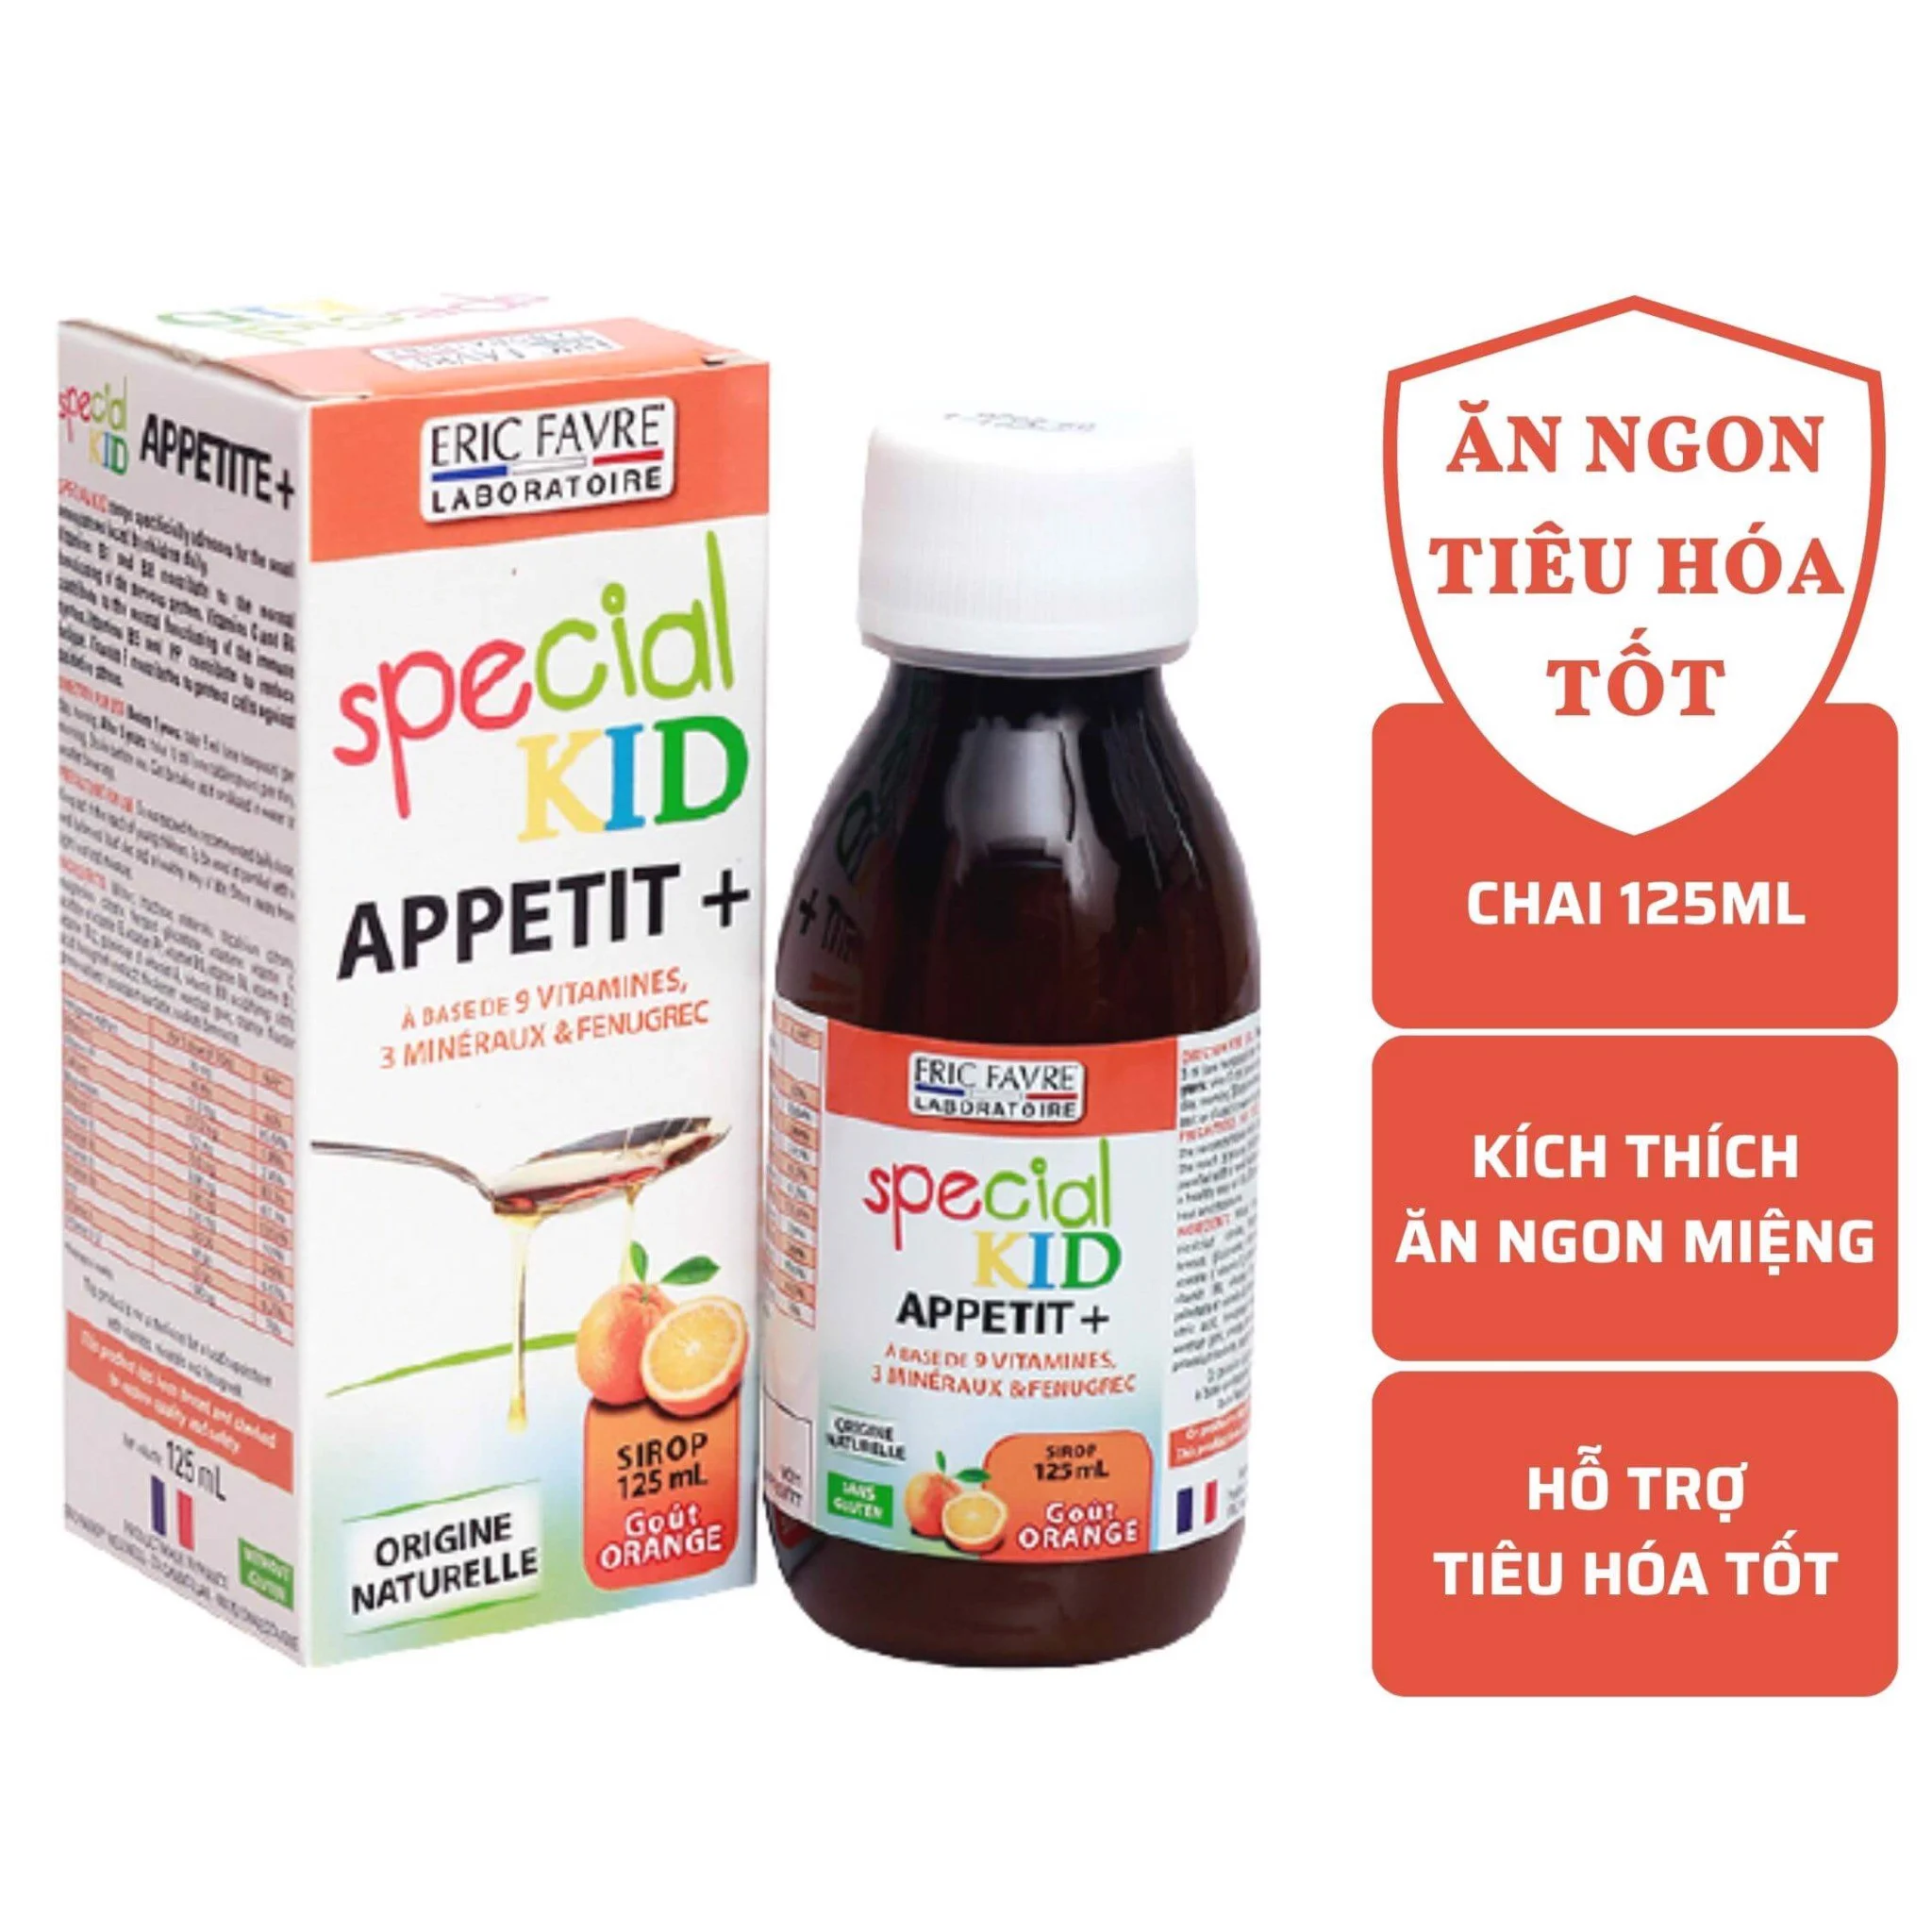 SPECIAL KID APPETIT +